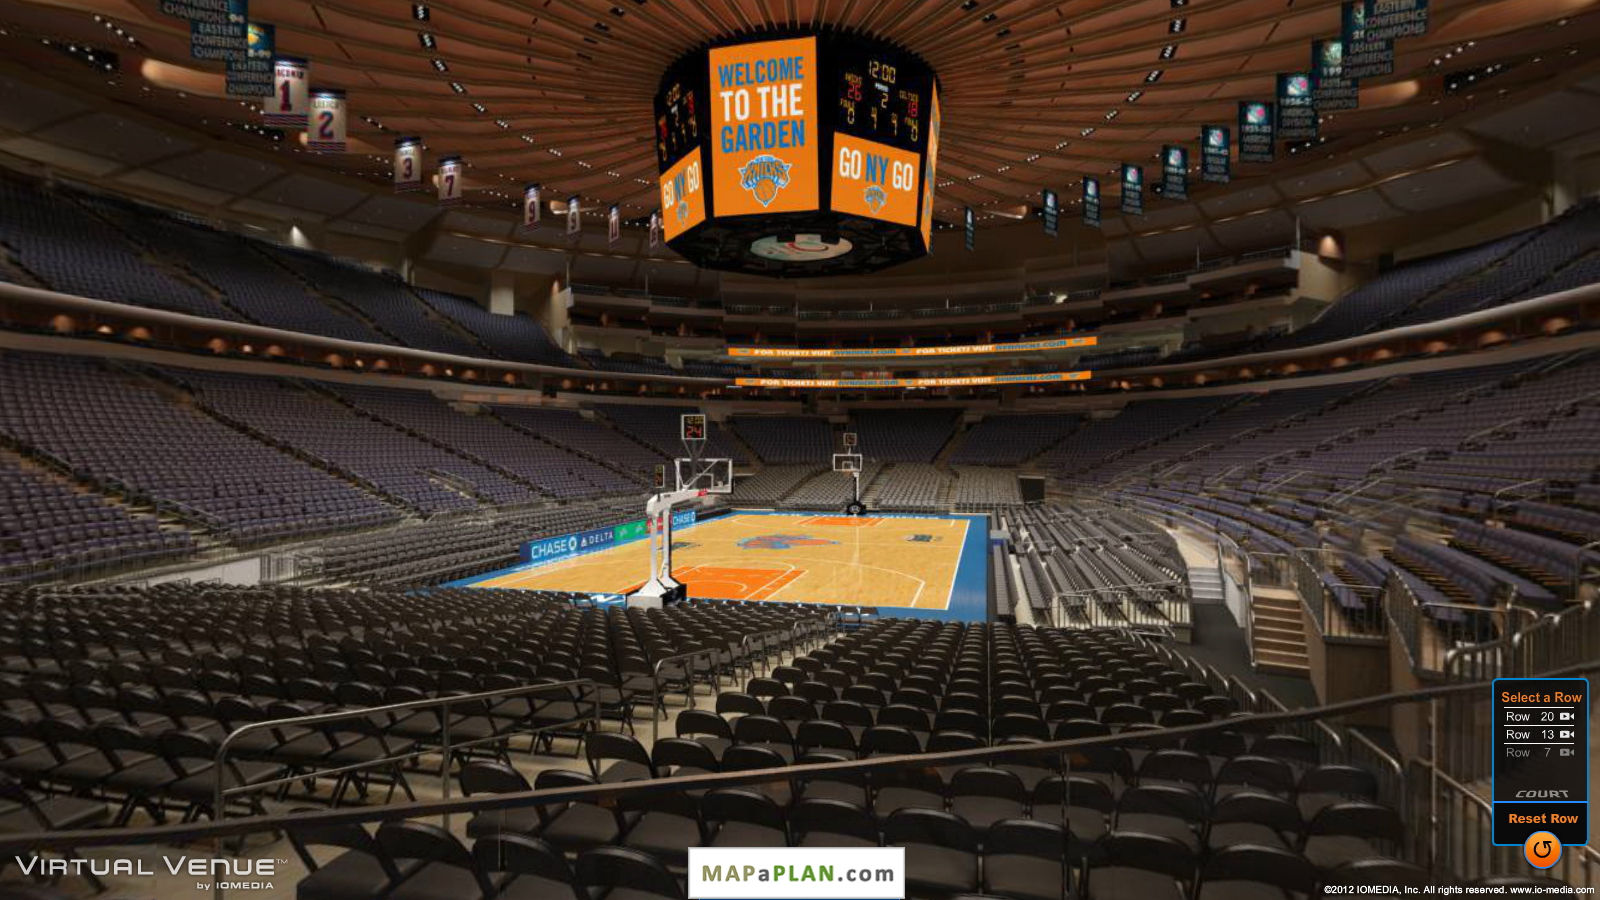 Madison square garden seating chart View from section 113